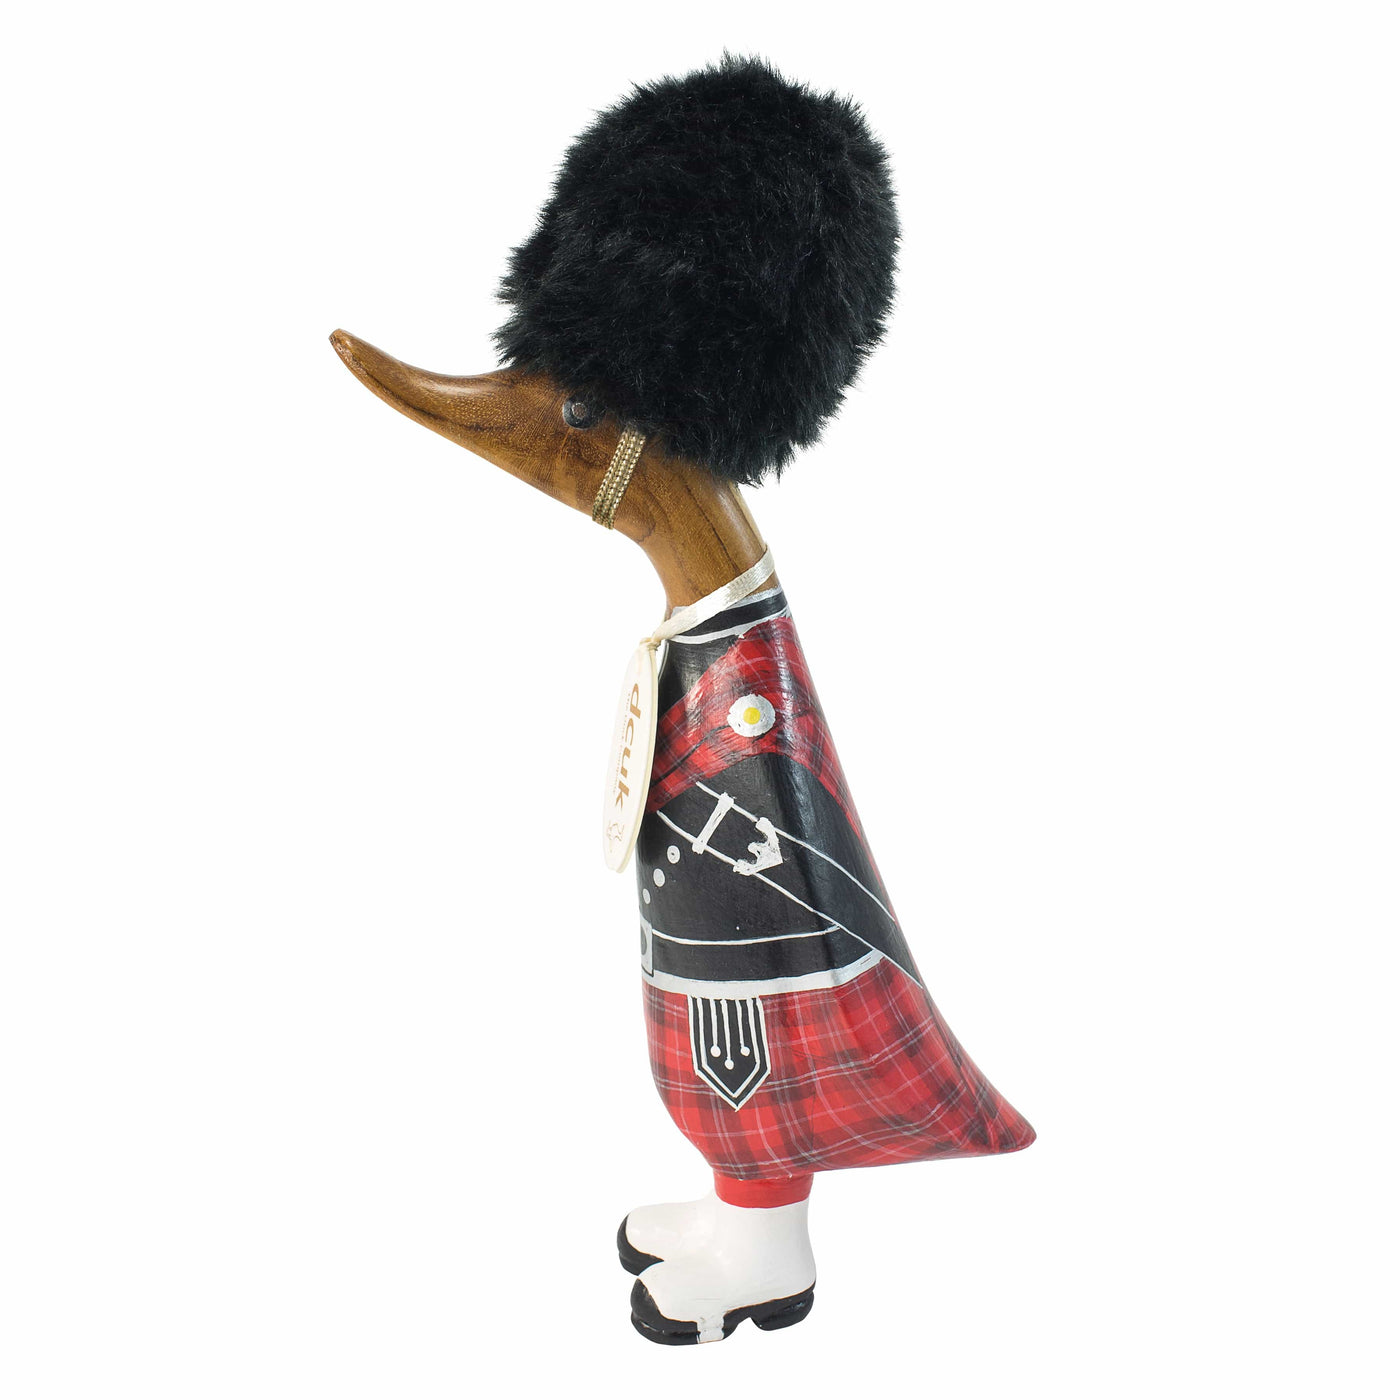 DCUK Ornaments Natural Wooden Scottish Guard Duckling